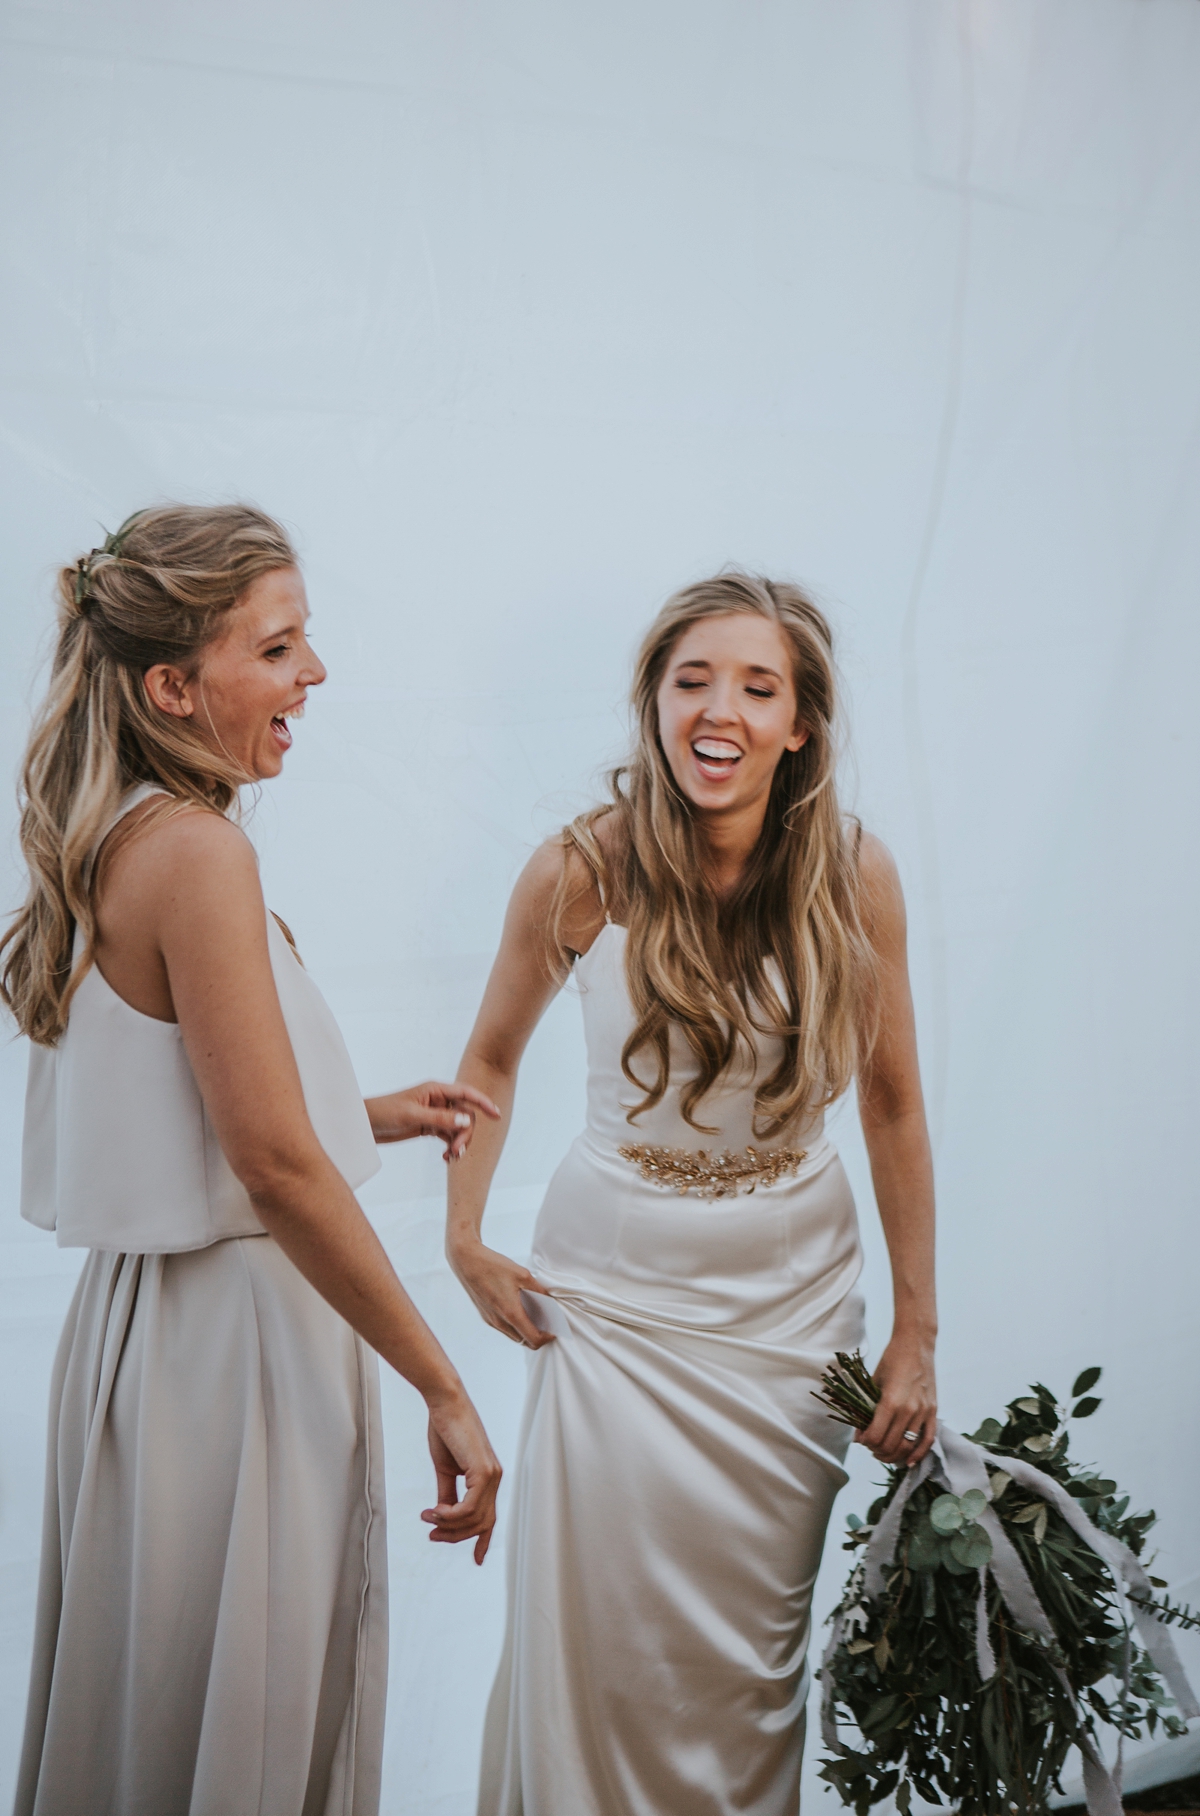 A Simple, Joyous, Loch Lomond Wedding with Family at the Heart | Love ...